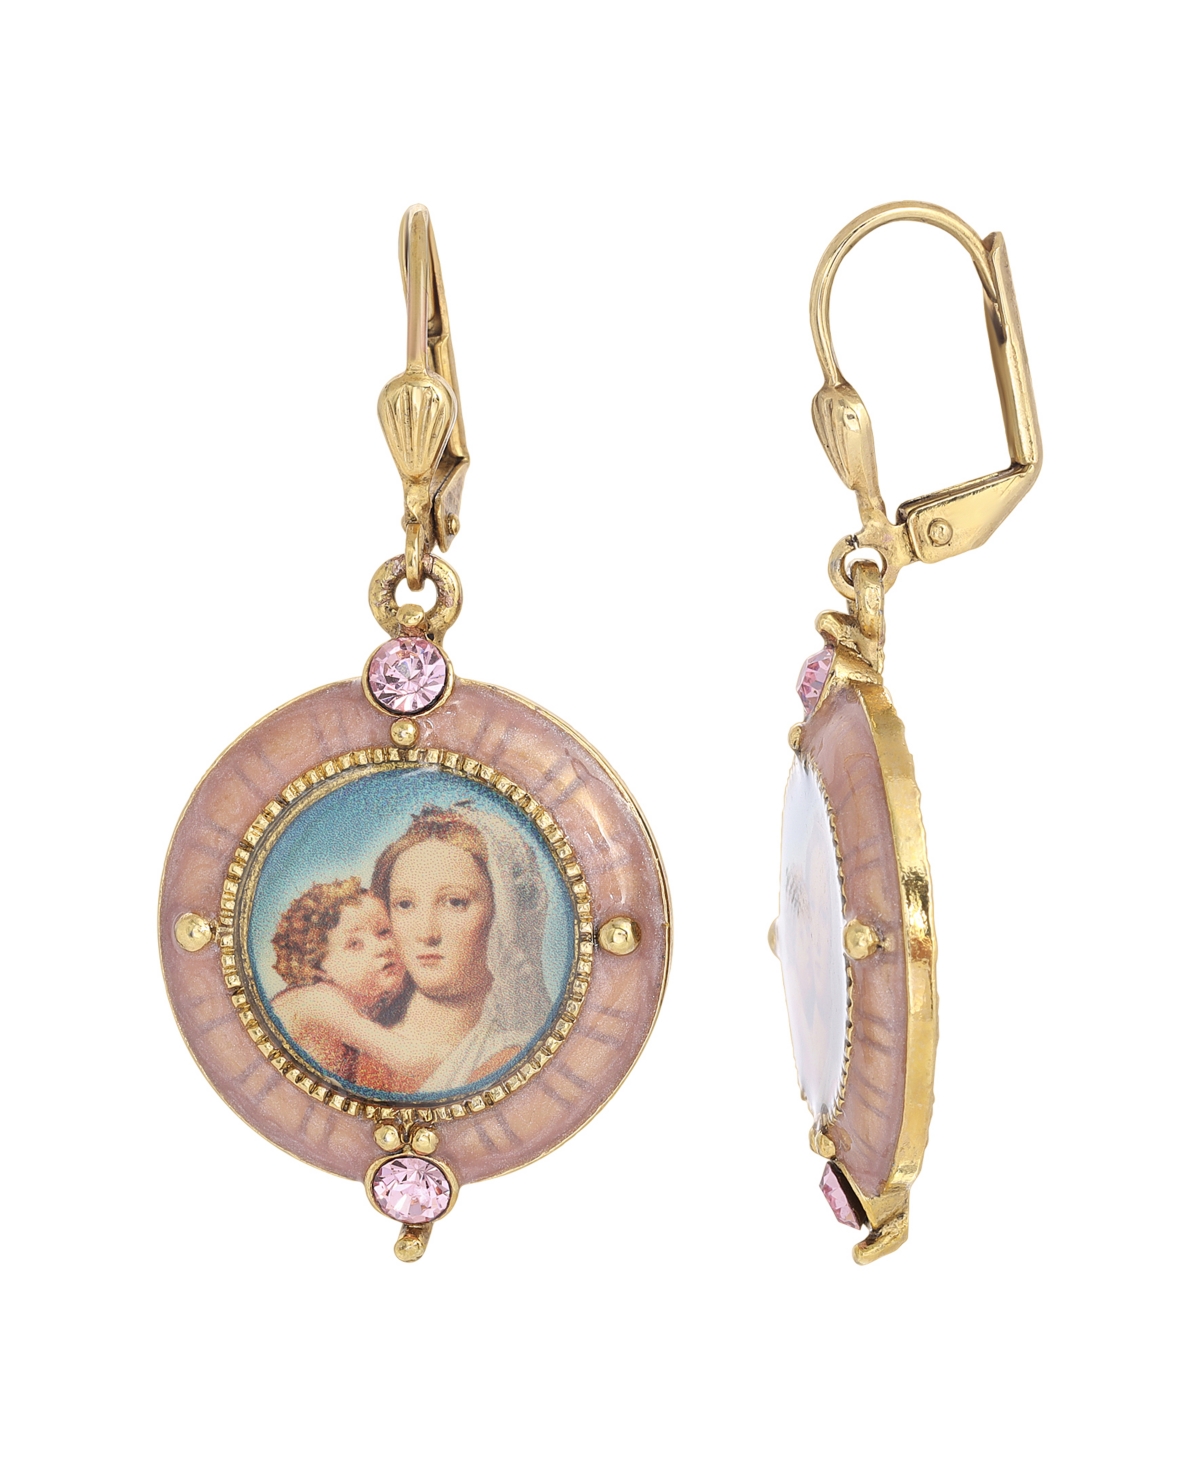 14K Gold-Dipped Crystal Enamel Mary and Child Decal Image Earrings - Pink